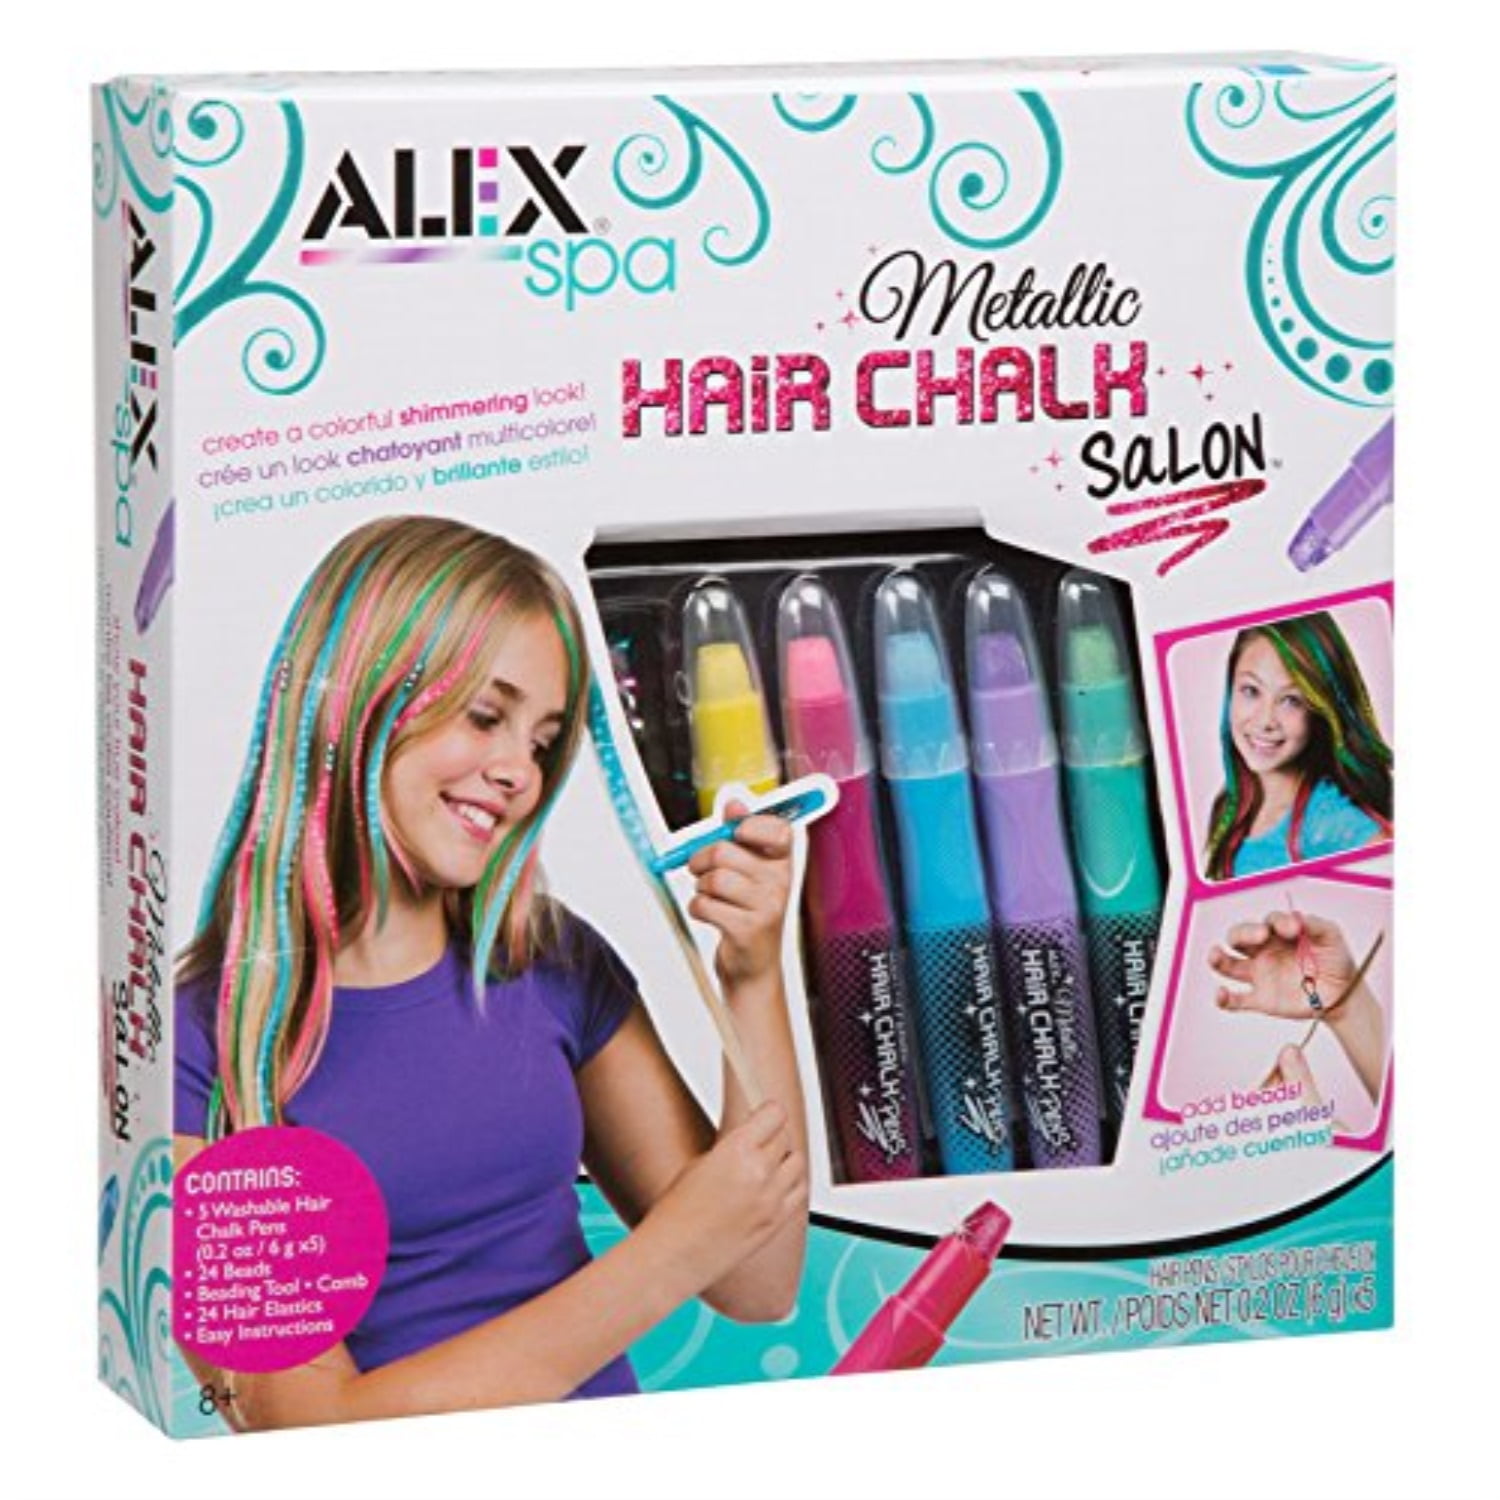 Jim&Gloria Dustless Hair Chalk Gifts For Girls, Temporary Color Dye Gifts  For Teenage Girls, Christmas Stocking Stuffers, Teens Tweens, Girl Stuff  Age 6 7 8 9 10 11 12 13 Year Old Teenager Kids Toys